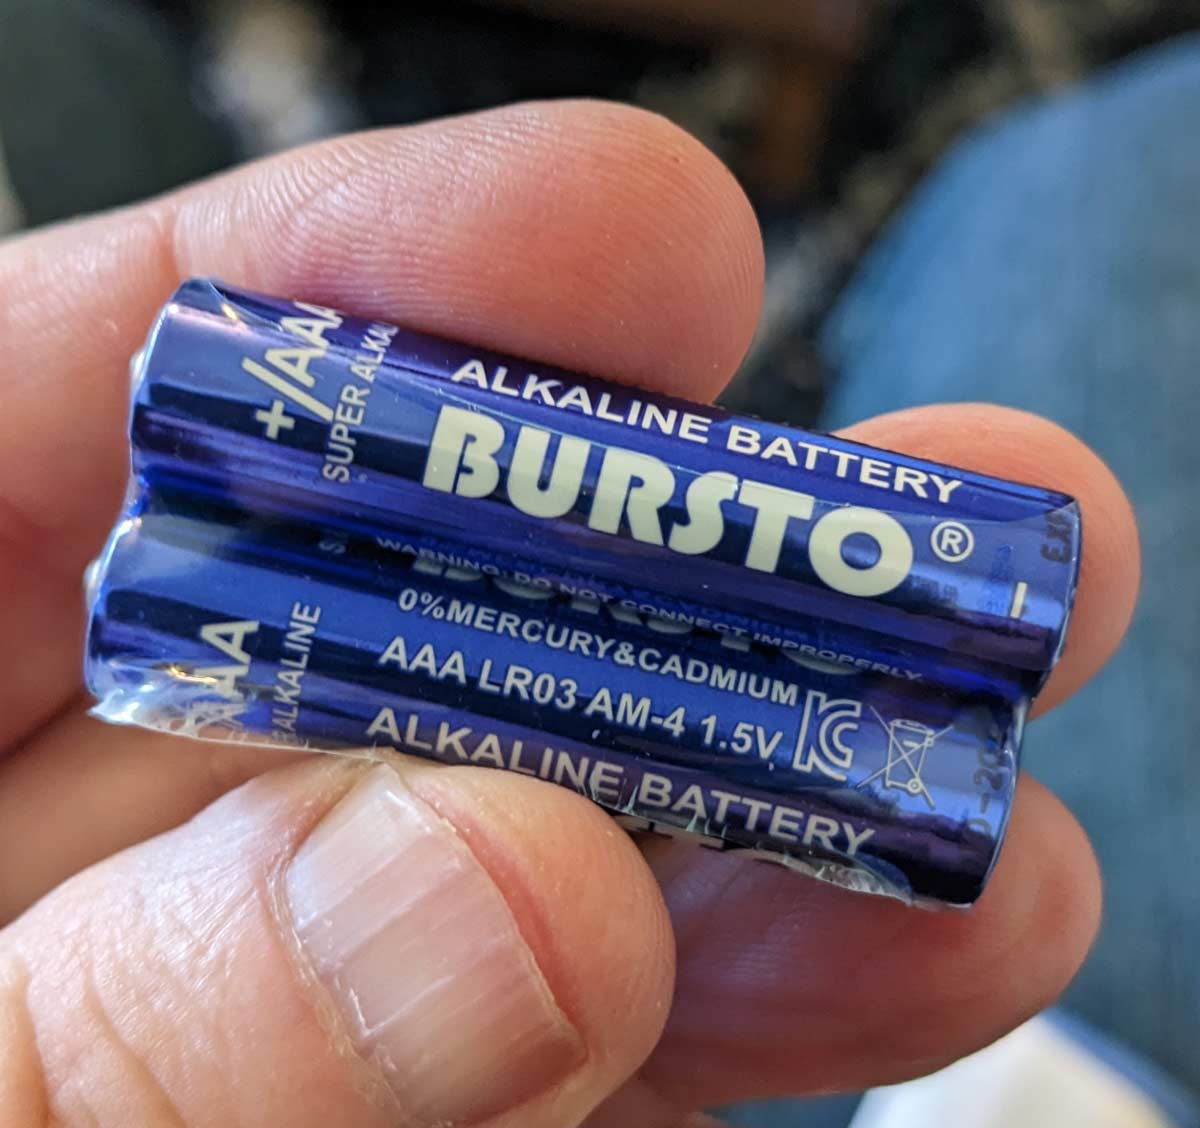 Is this really the best name for a battery?